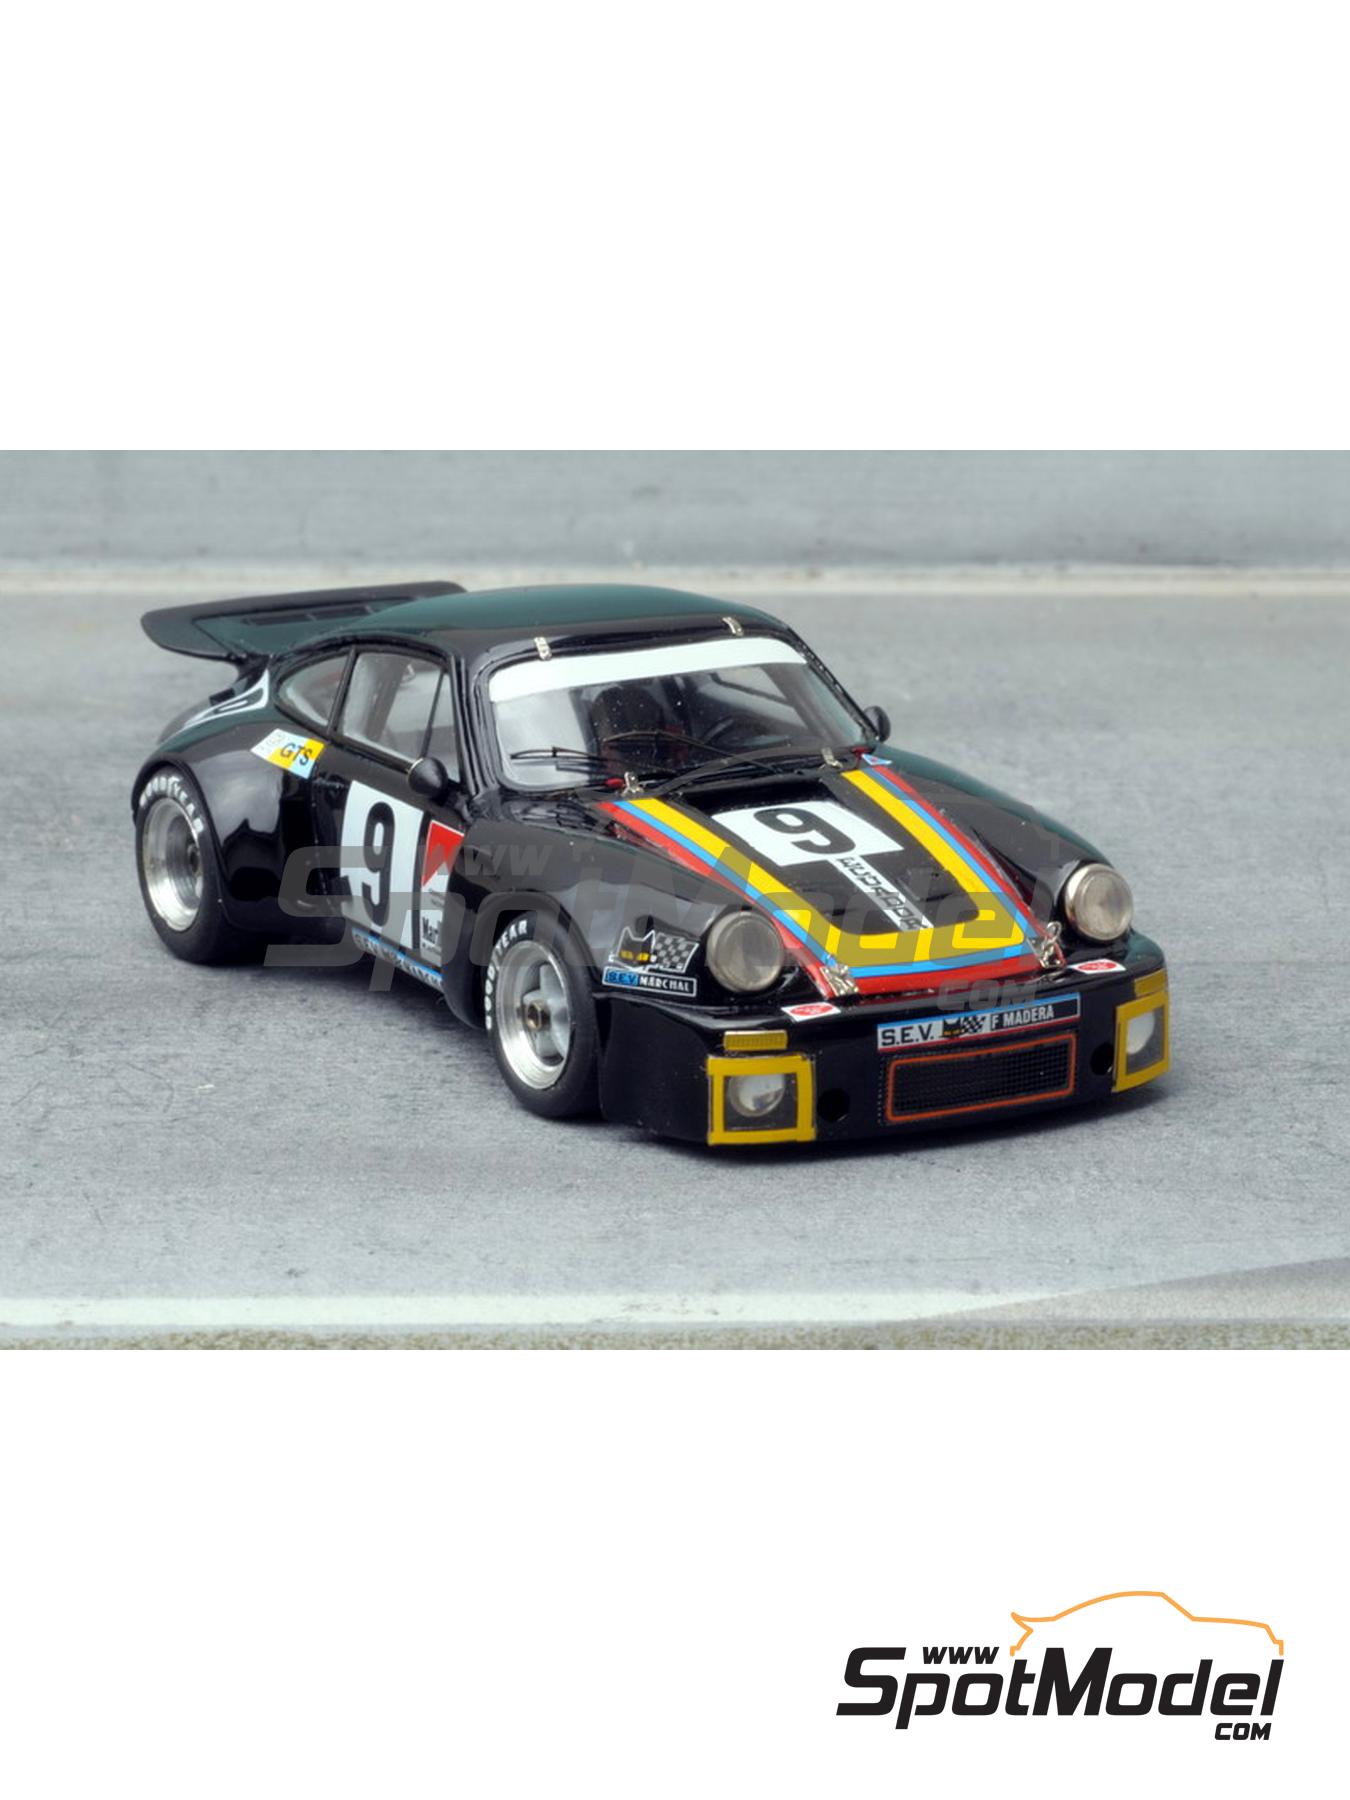 FLY 88274 PORSCHE 911 24 HOURS OF LE MANS 73' NEW 1/32 SLOT CAR IN DISPLAY CASE 